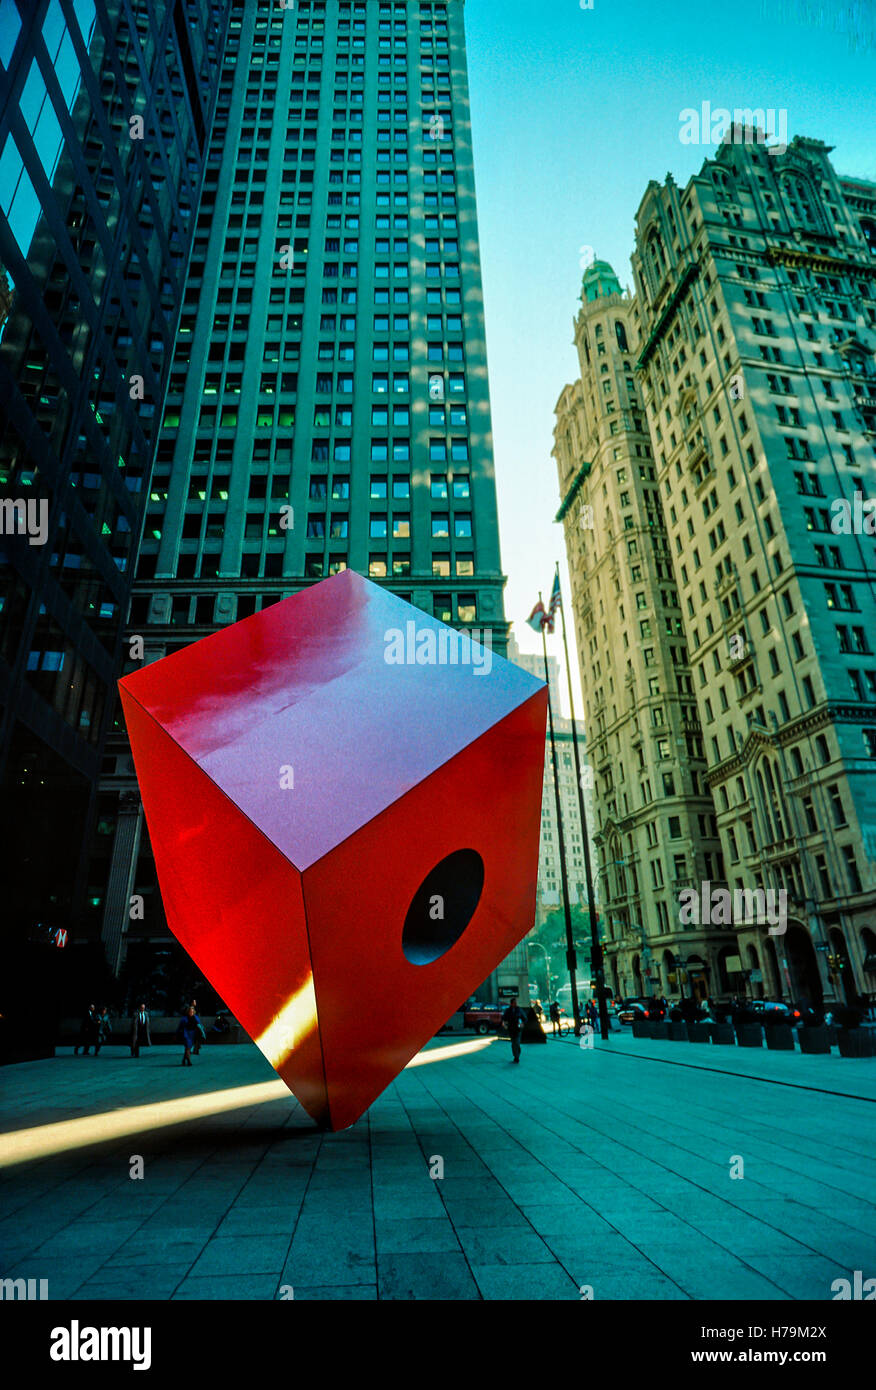 Sculpture in memory of Harry B. Helmsley in New York City, USA. Stock Photo